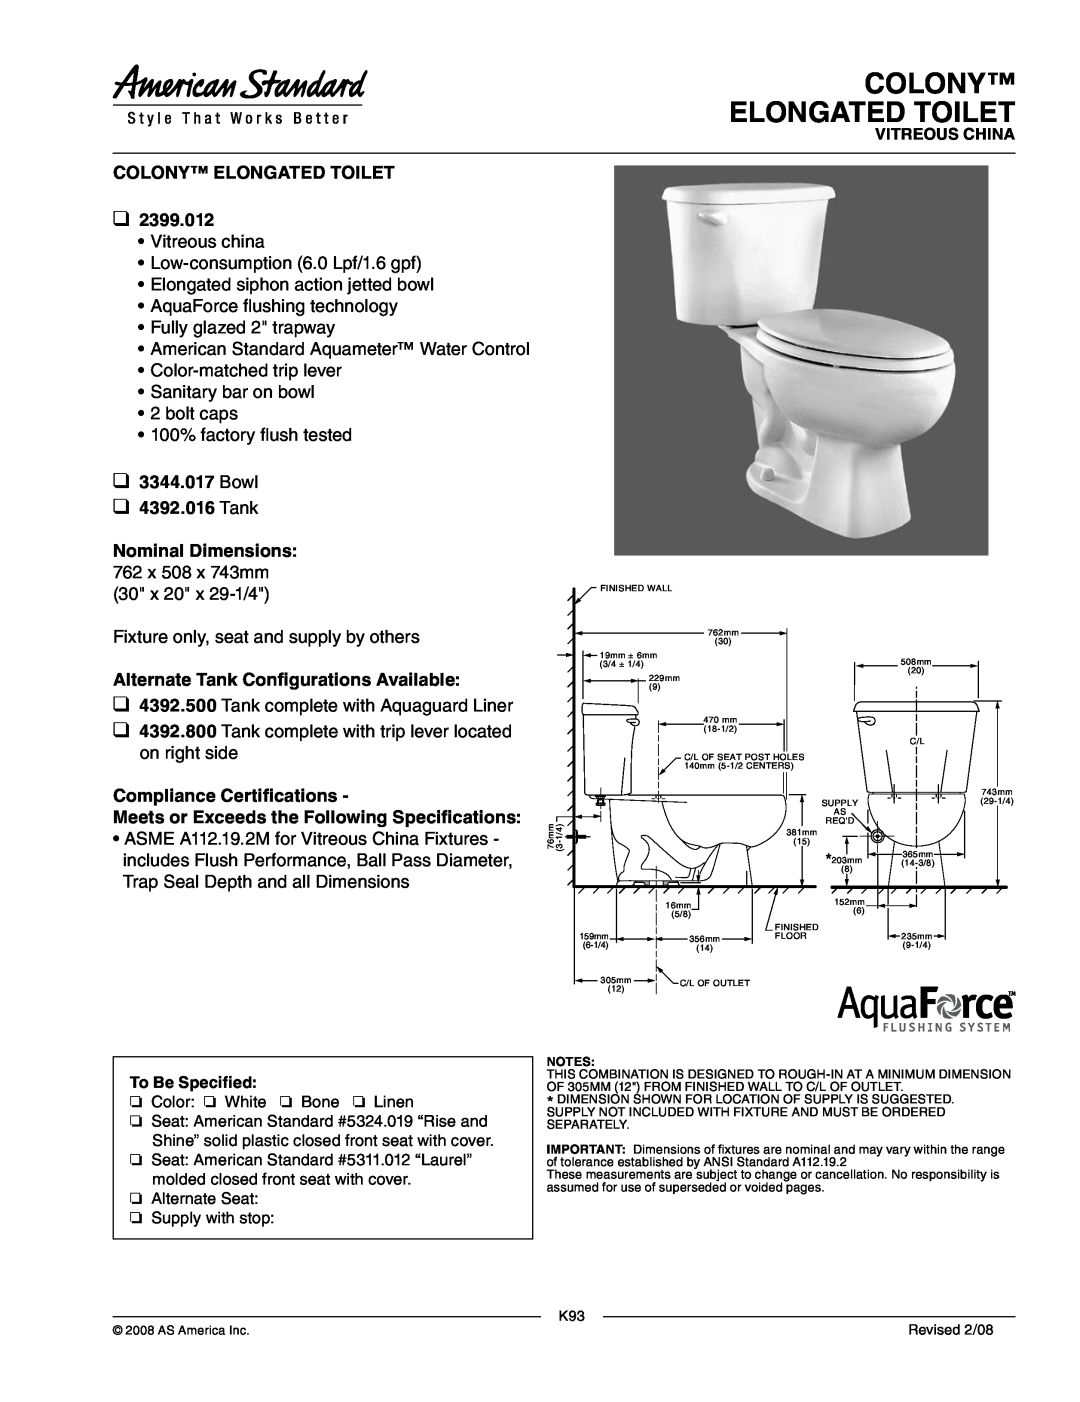 American Standard 2399.012 dimensions Colony Elongated Toilet, Bowl 4392.016 Tank, Alternate Tank Configurations Available 